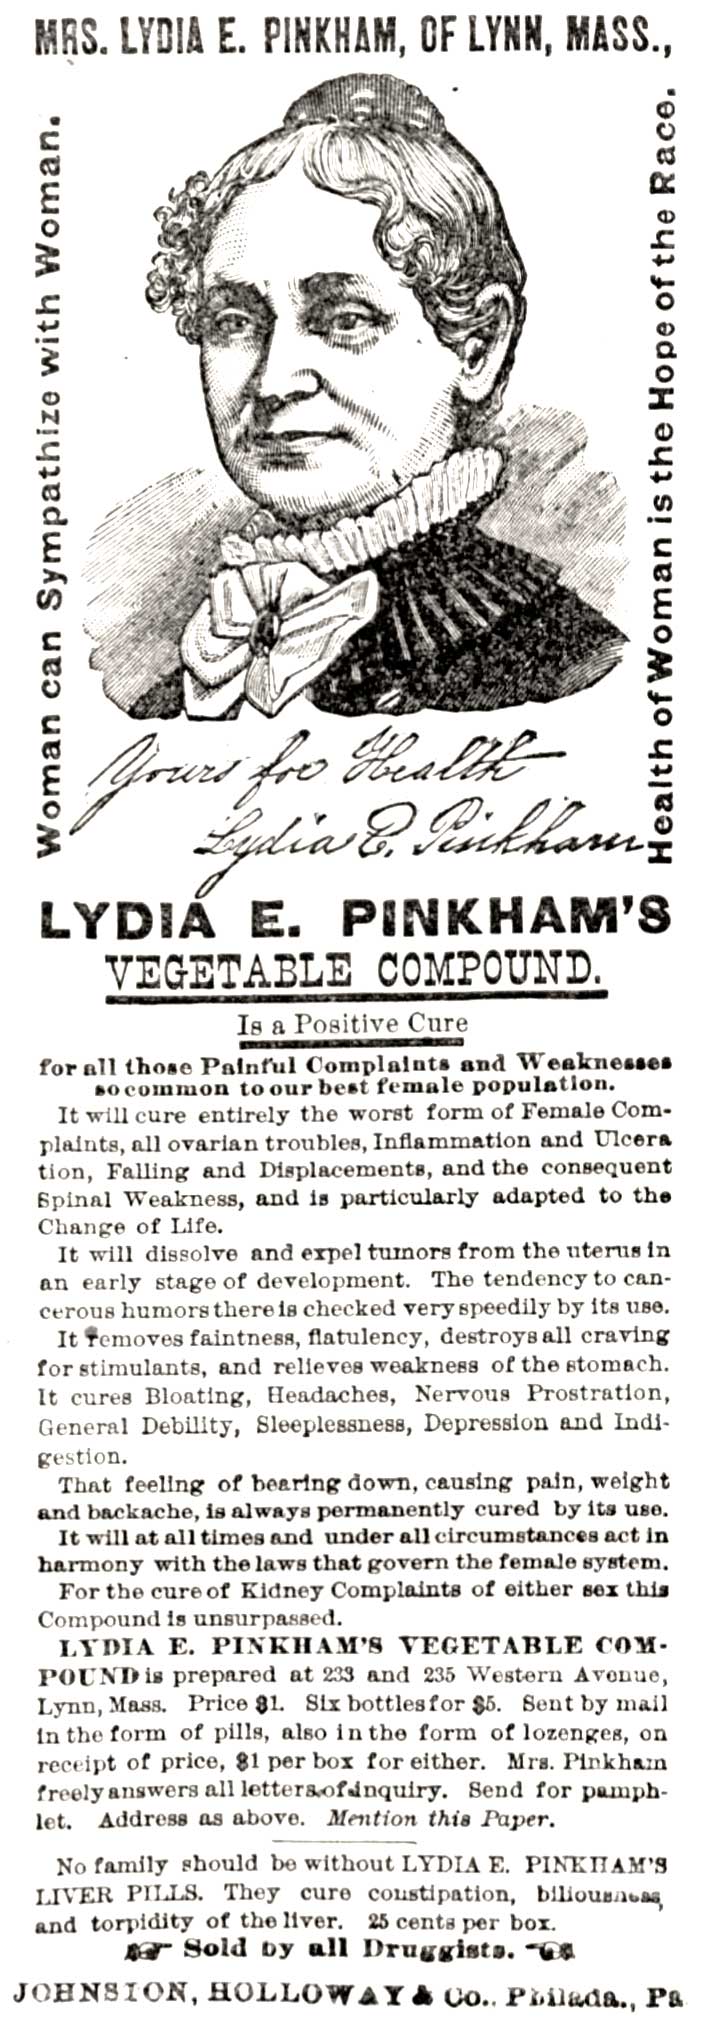 Vintage Ad for Ludia E. Pinkham's Vegetable Compound